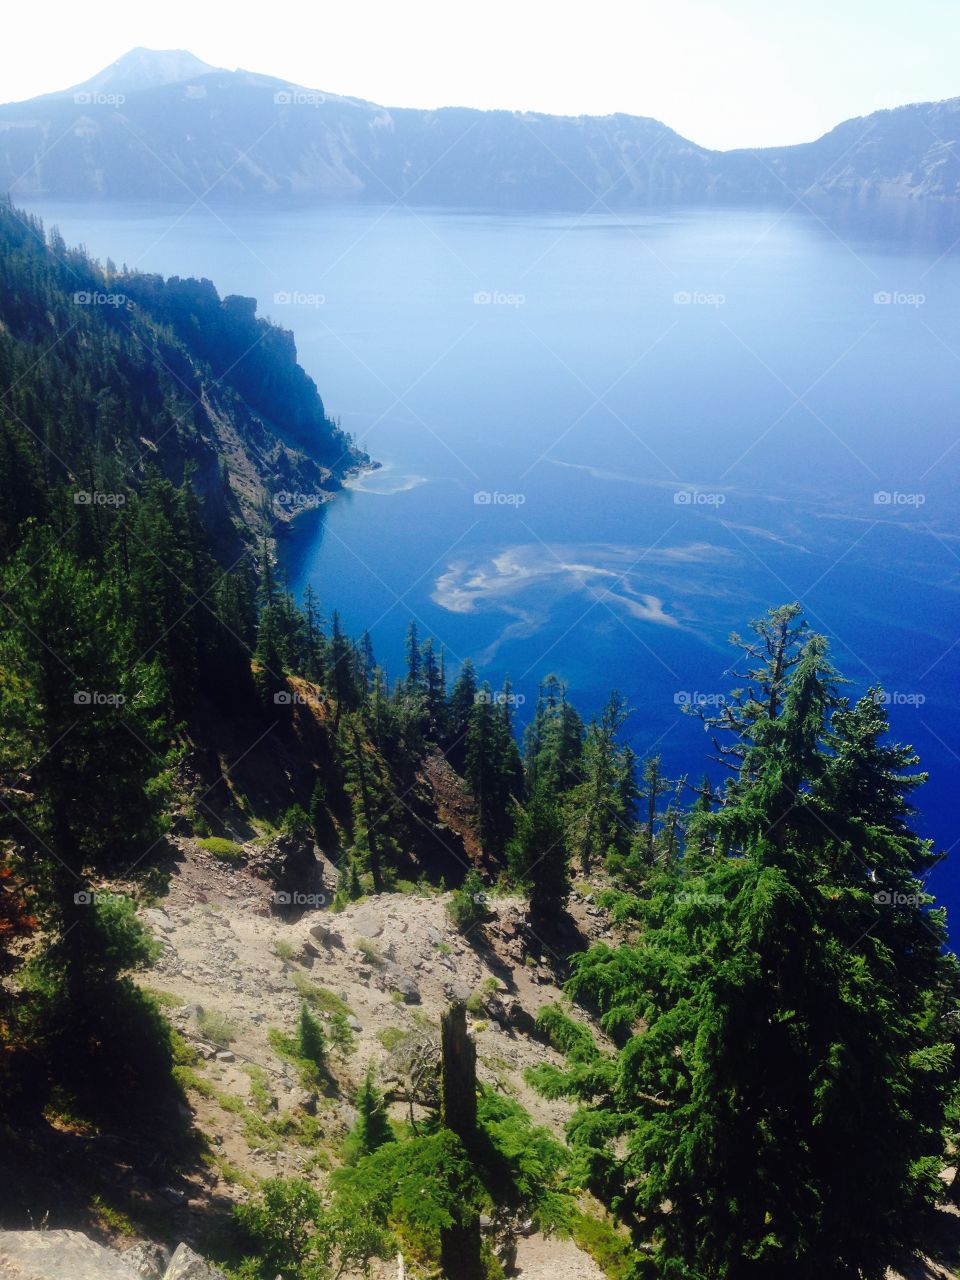 Crater lake crystal blue